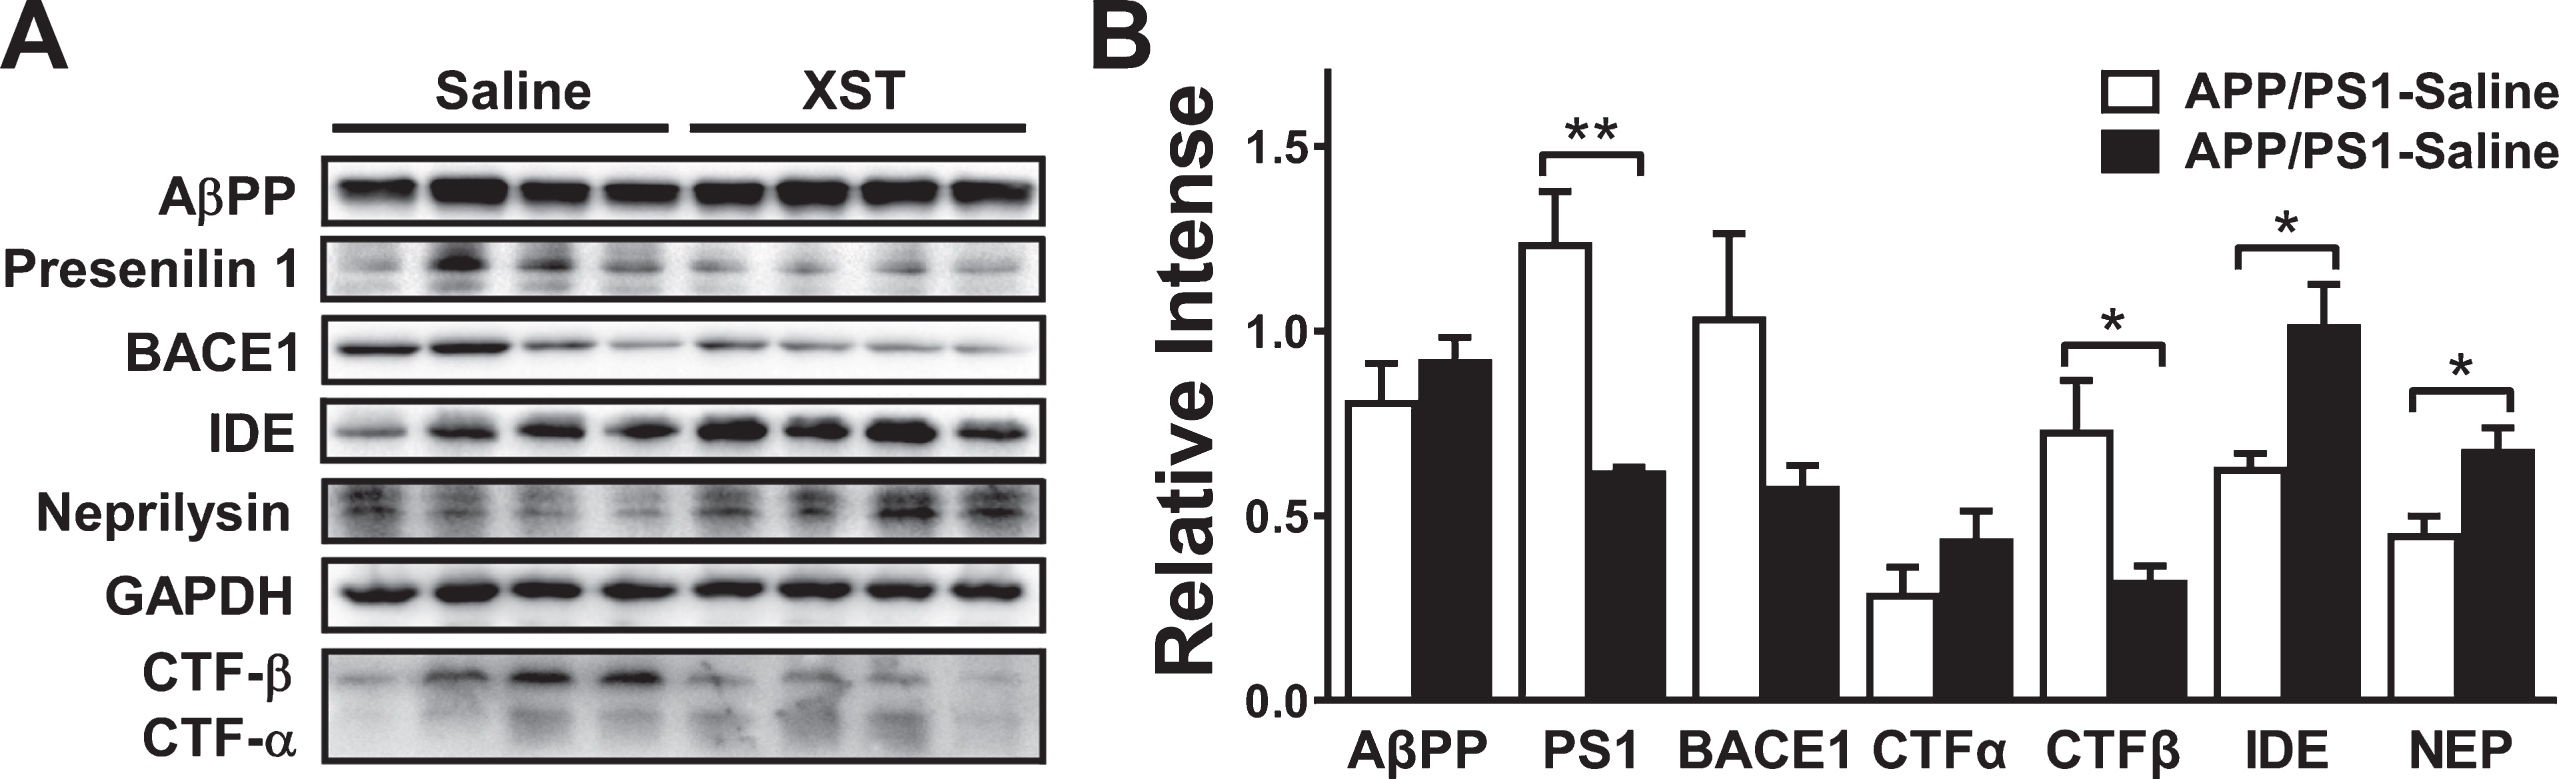 Effect of XST treatment on the expression of key regulator of Aβ production and clearance in the APP/PS1 mouse brain. A) Representative western blots for the levels of various molecules examined. GAPDH was used as the control for protein loading and transfer efficiency. B) XST did not affect the protein levels of AβPP and CTF-α, but reduced the levels of presenilin 1 (**p = 0.0058) and CTF-β (*p = 0.035). The trend of reduction in BACE1 was not significant. In addition, XST increased the levels of IDE (*p = 0.022) and neprilysin (*p = 0.038). n = 4 mice per group.